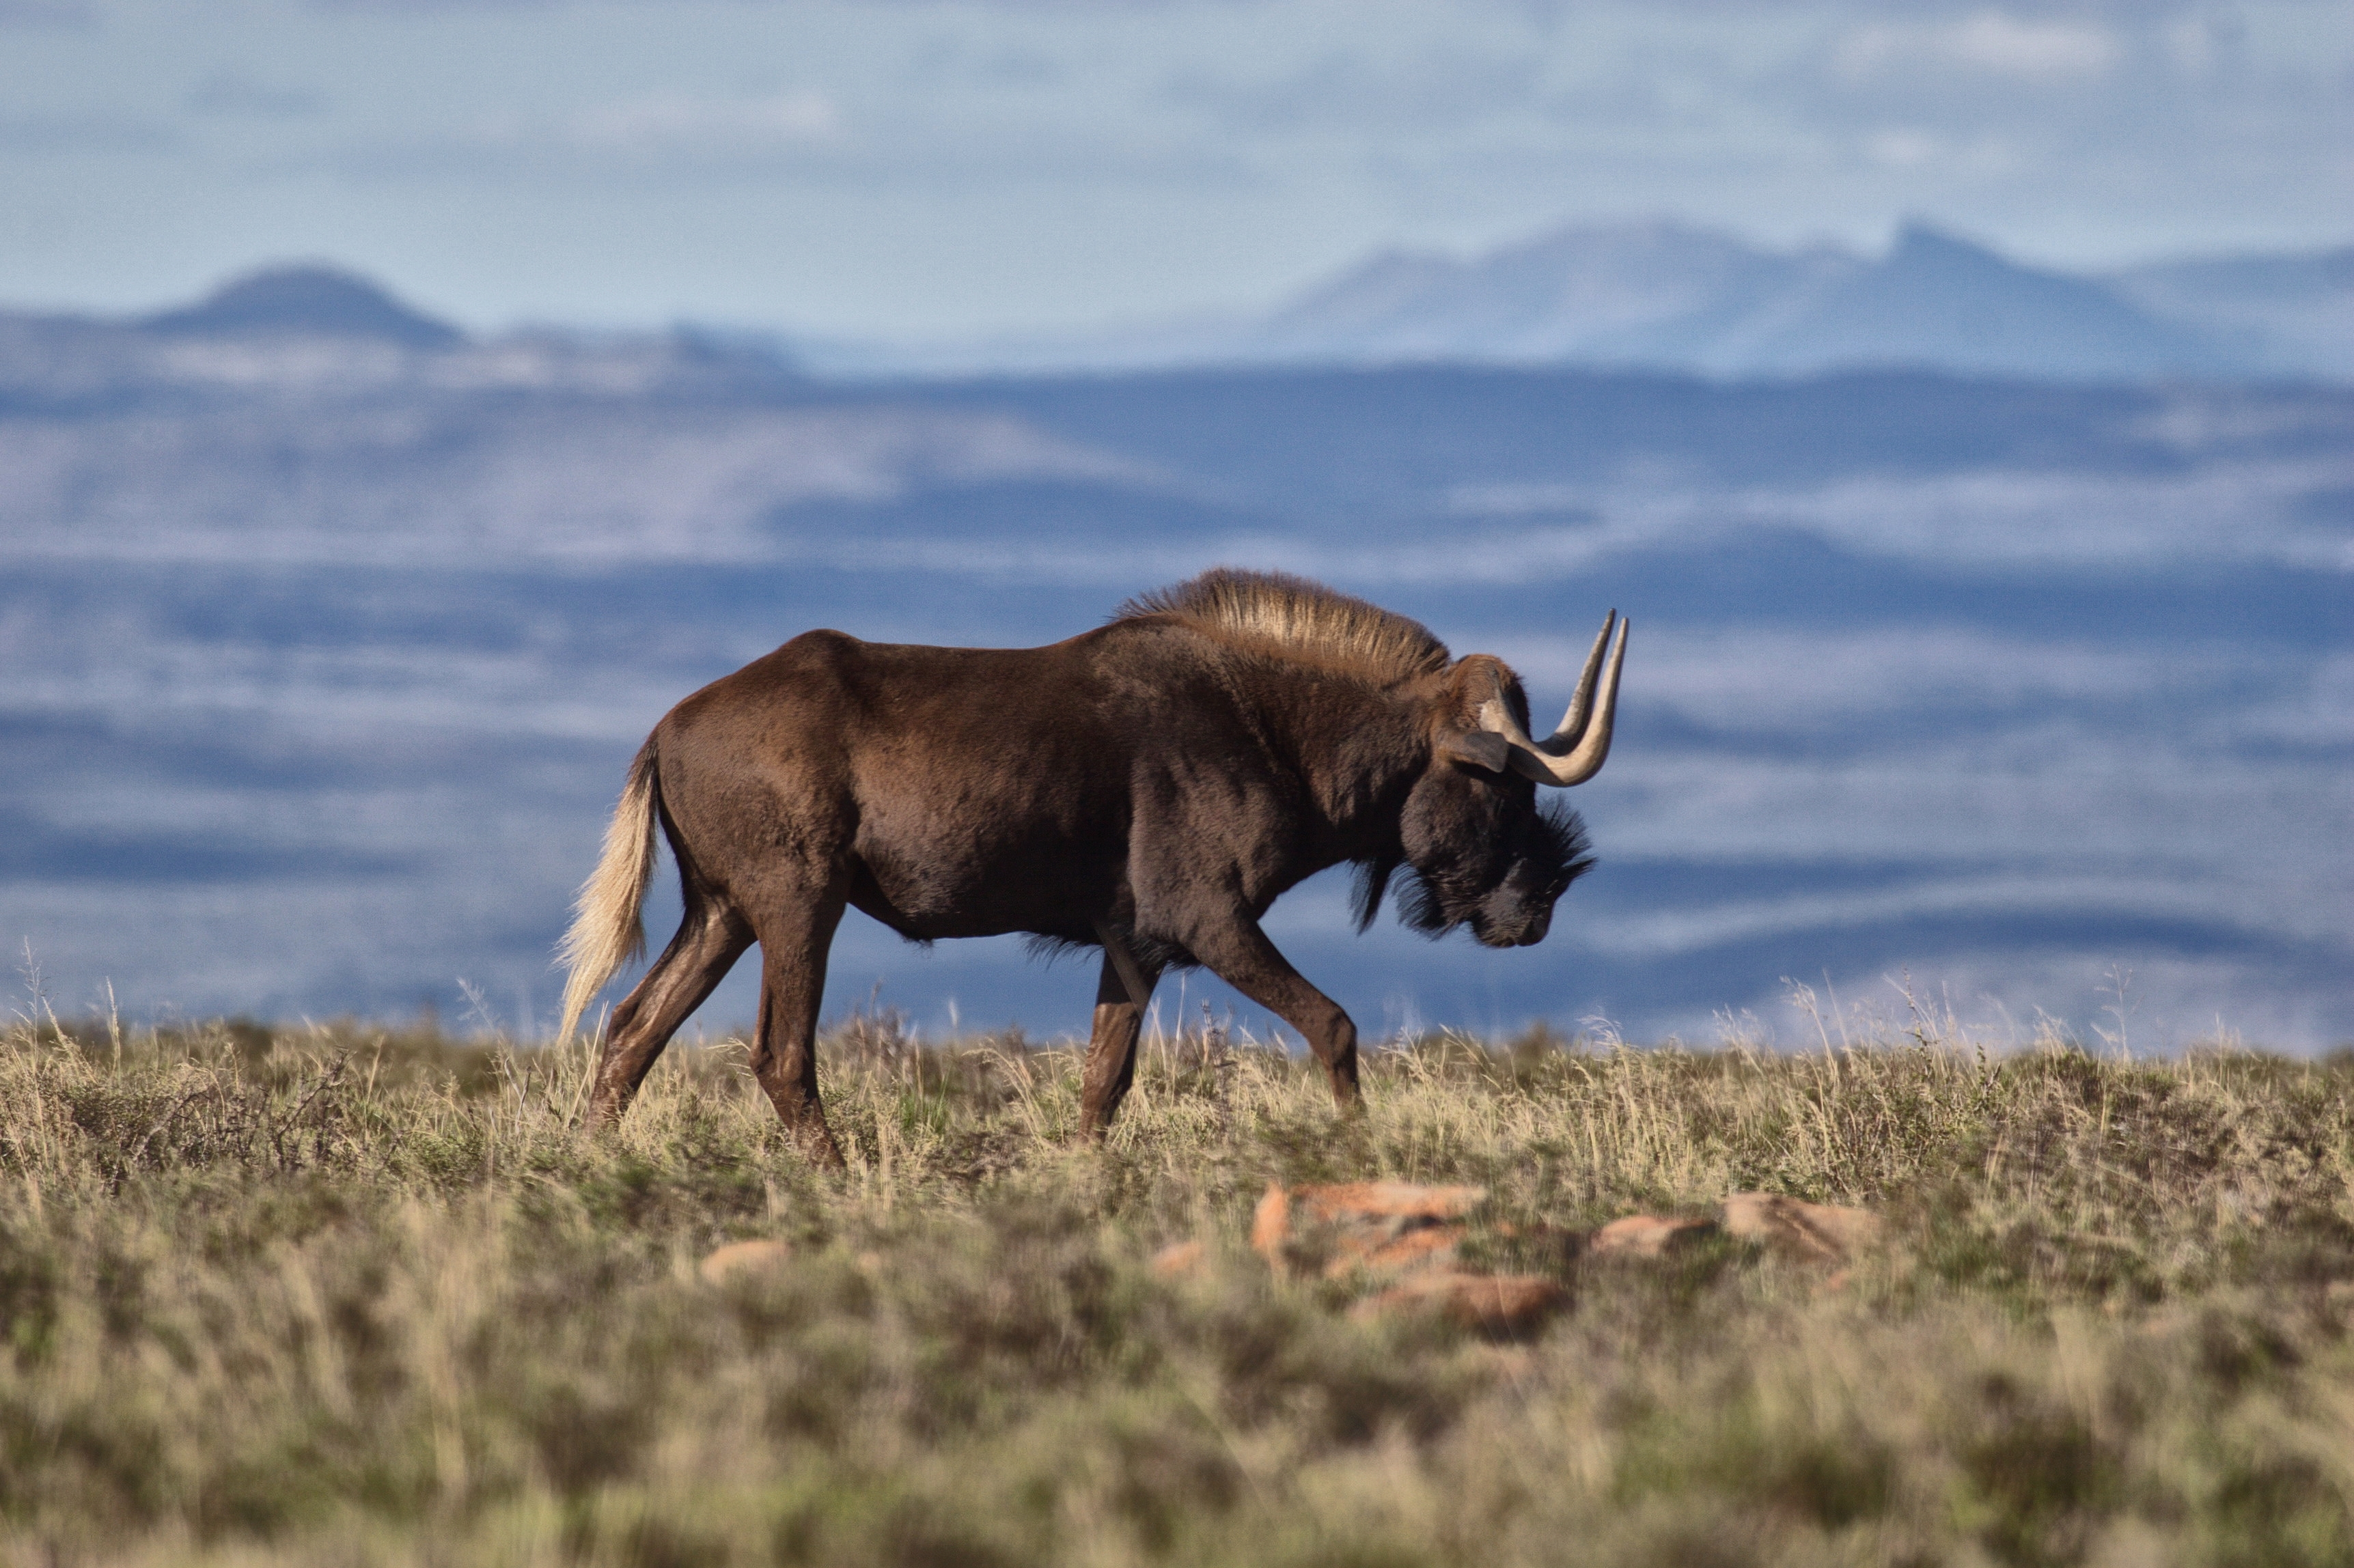 Black wildebeest, which only occur in South Africa, have a rather strange and distinctive profile. 